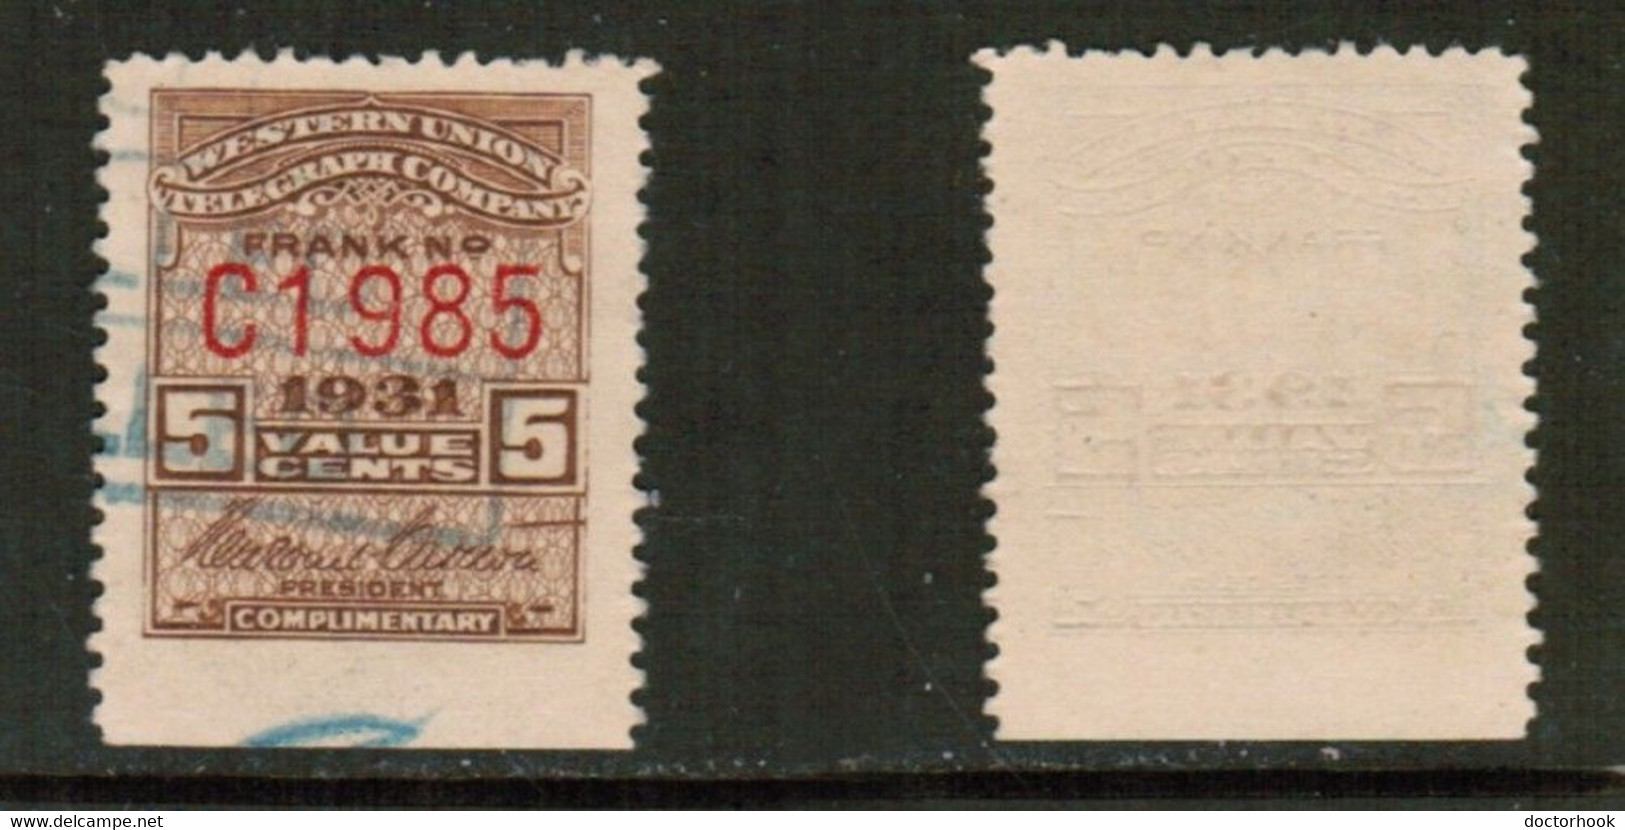 U.S.A.  1931---5 CENT WESTERN UNION TELEGRAPH STAMP USED (CONDITION AS PER SCAN) (Stamp Scan # 839-15) - Telegraphenmarken